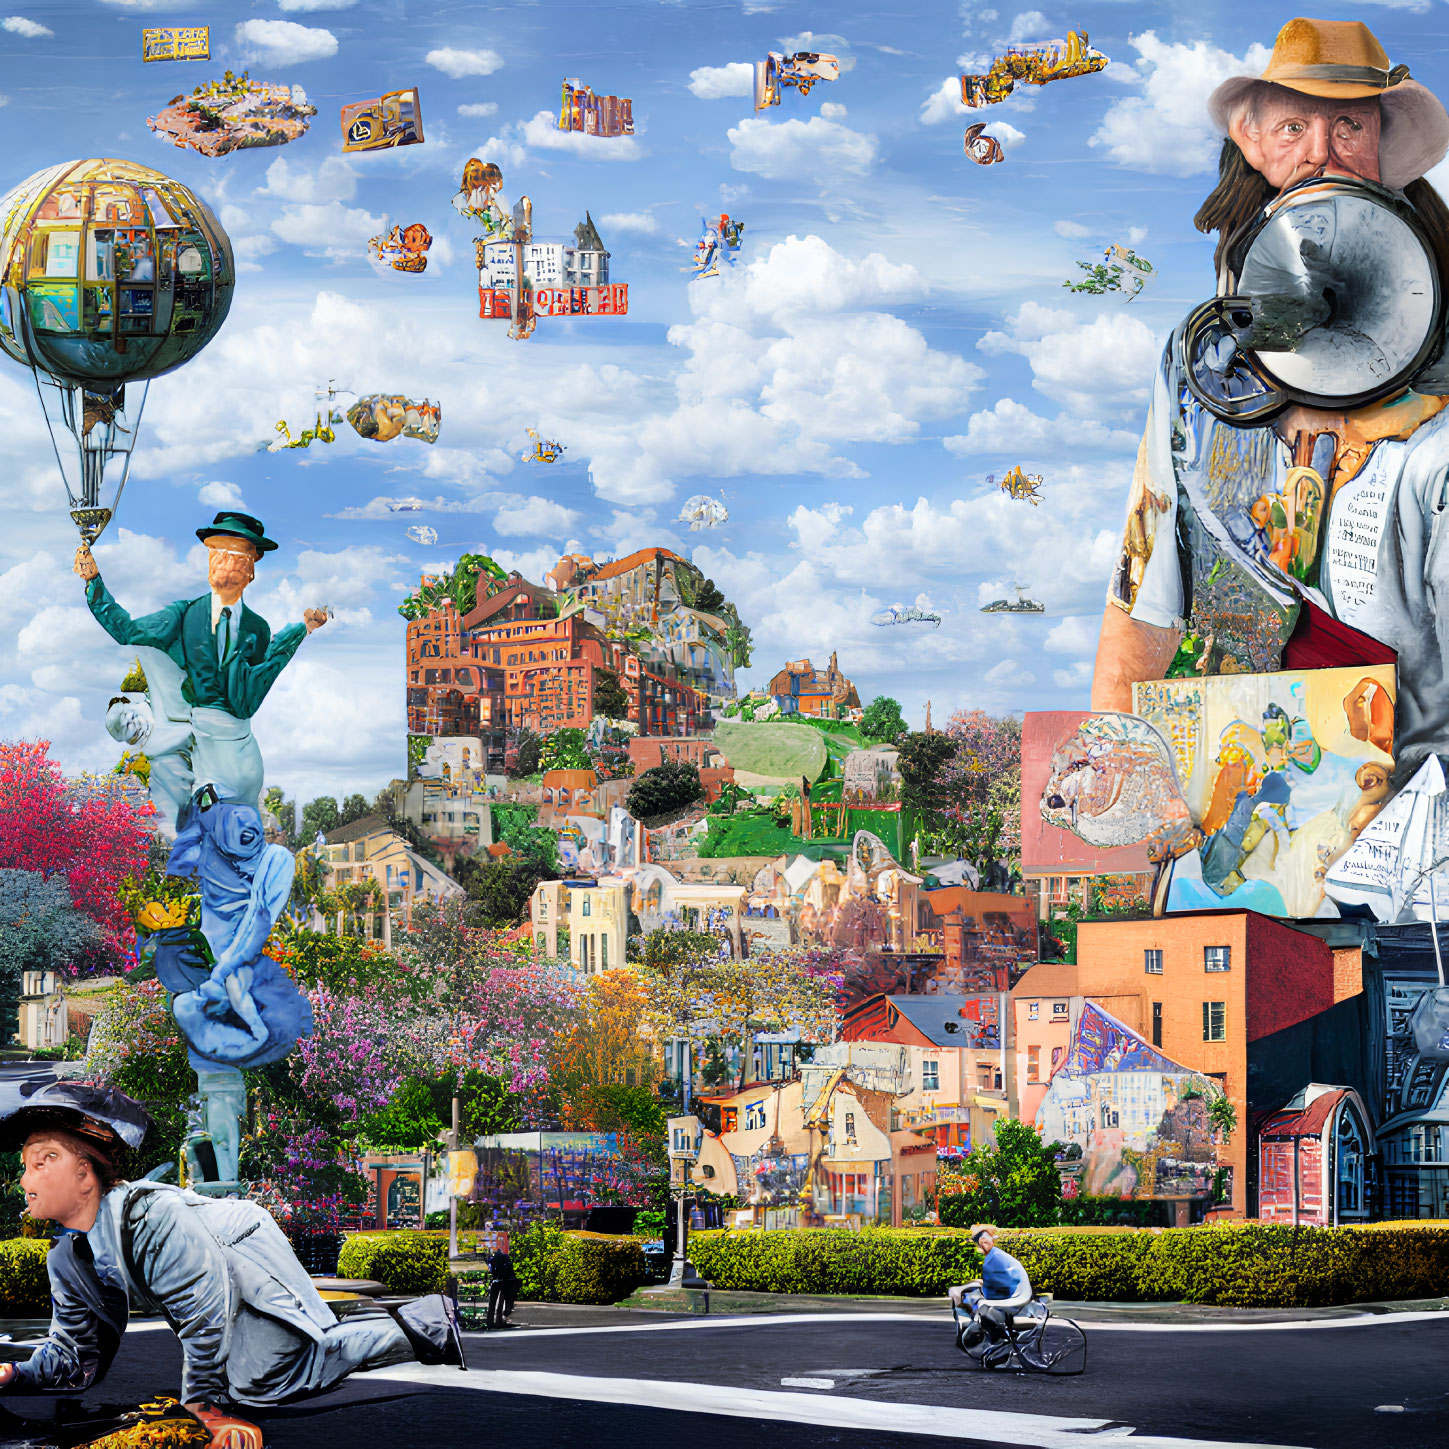 Vibrant cityscapes, flying houses, and surreal characters in whimsical collage